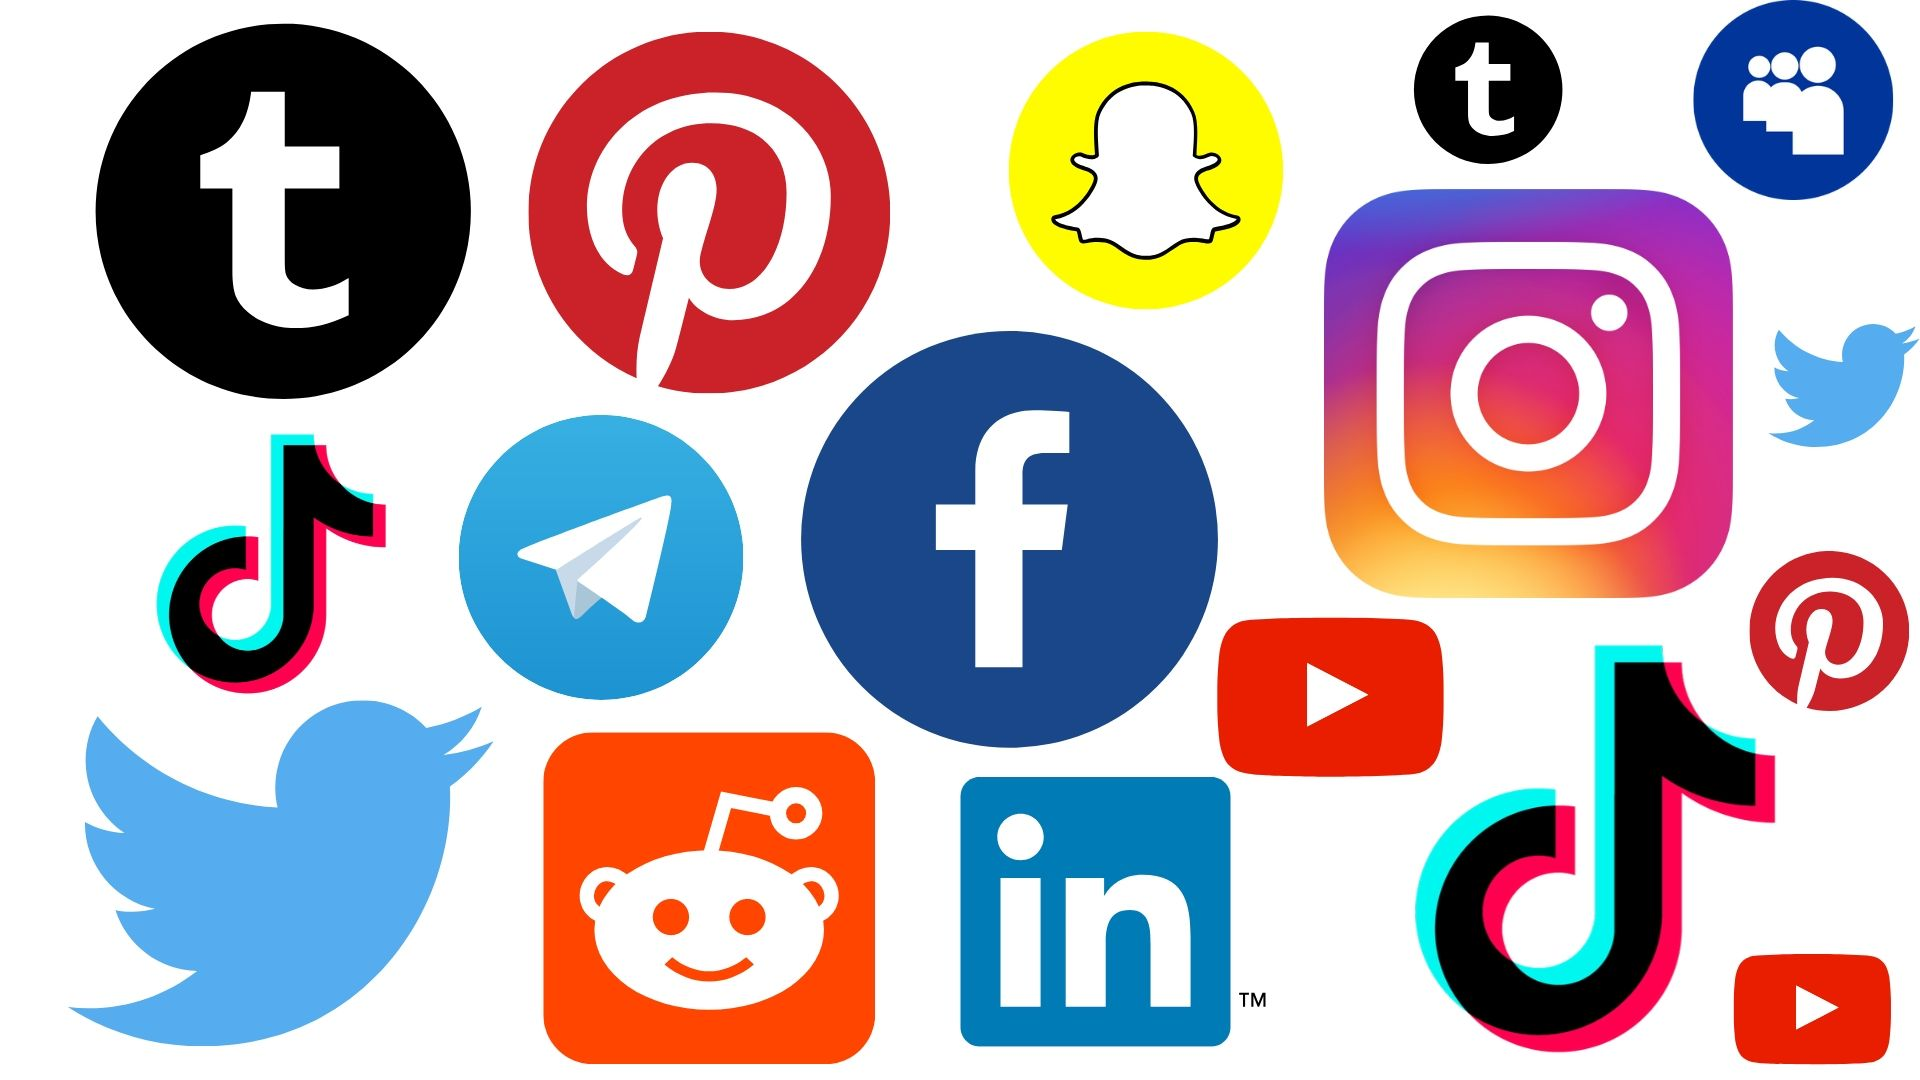 15 Most Popular Social Networks in The World